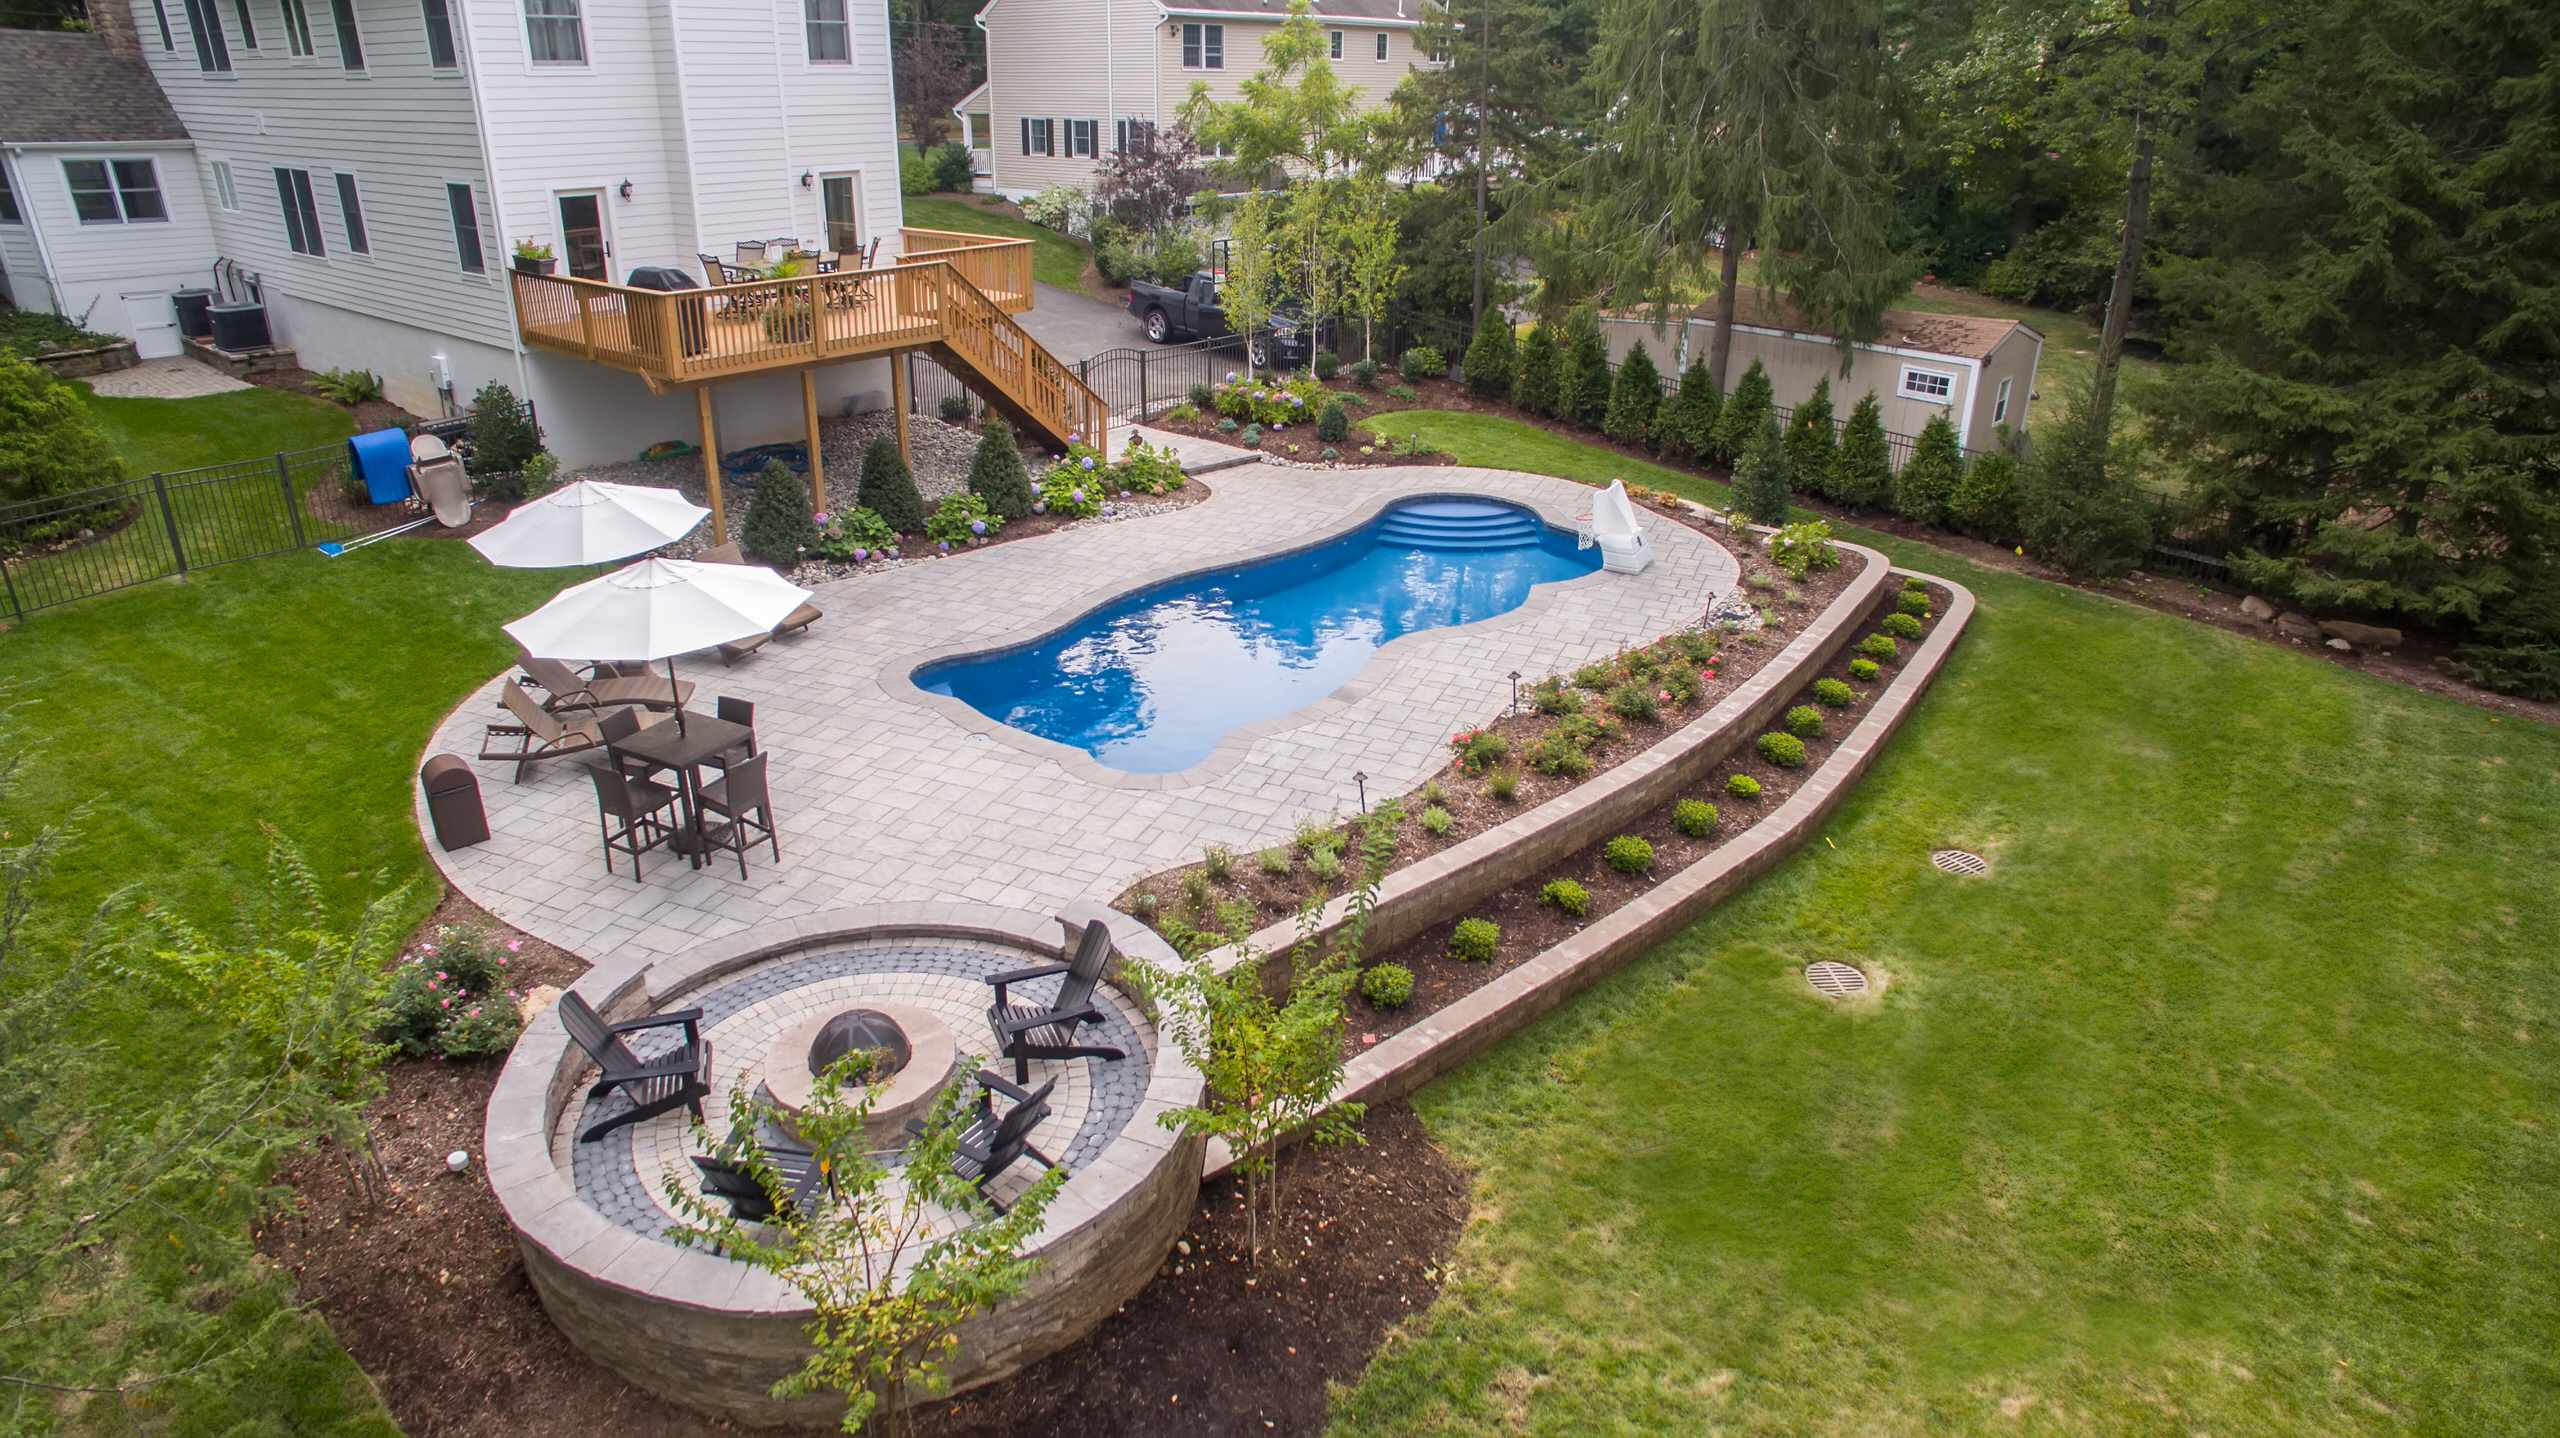 Creating a pool area on a sloped backyard